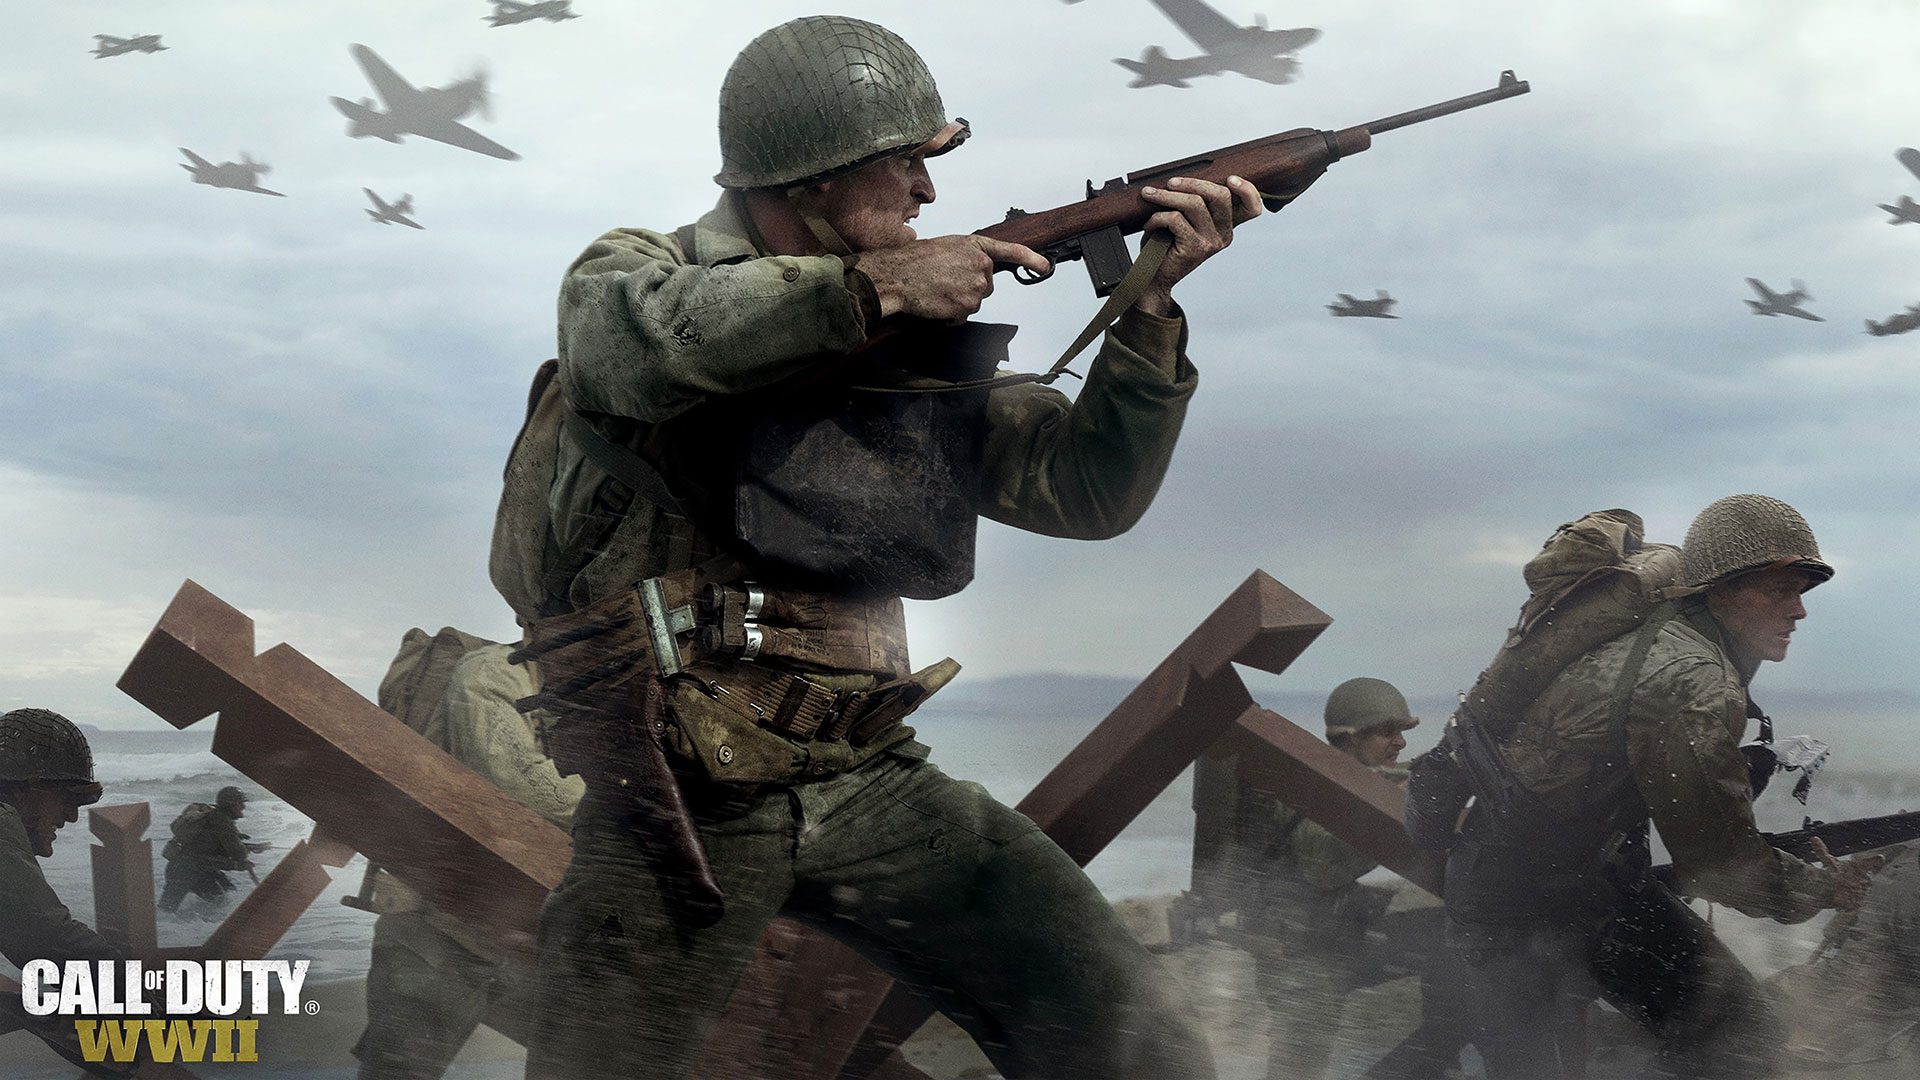 CALL OF DUTY WWII Wallpapers in Ultra HD 4K 1920x1080